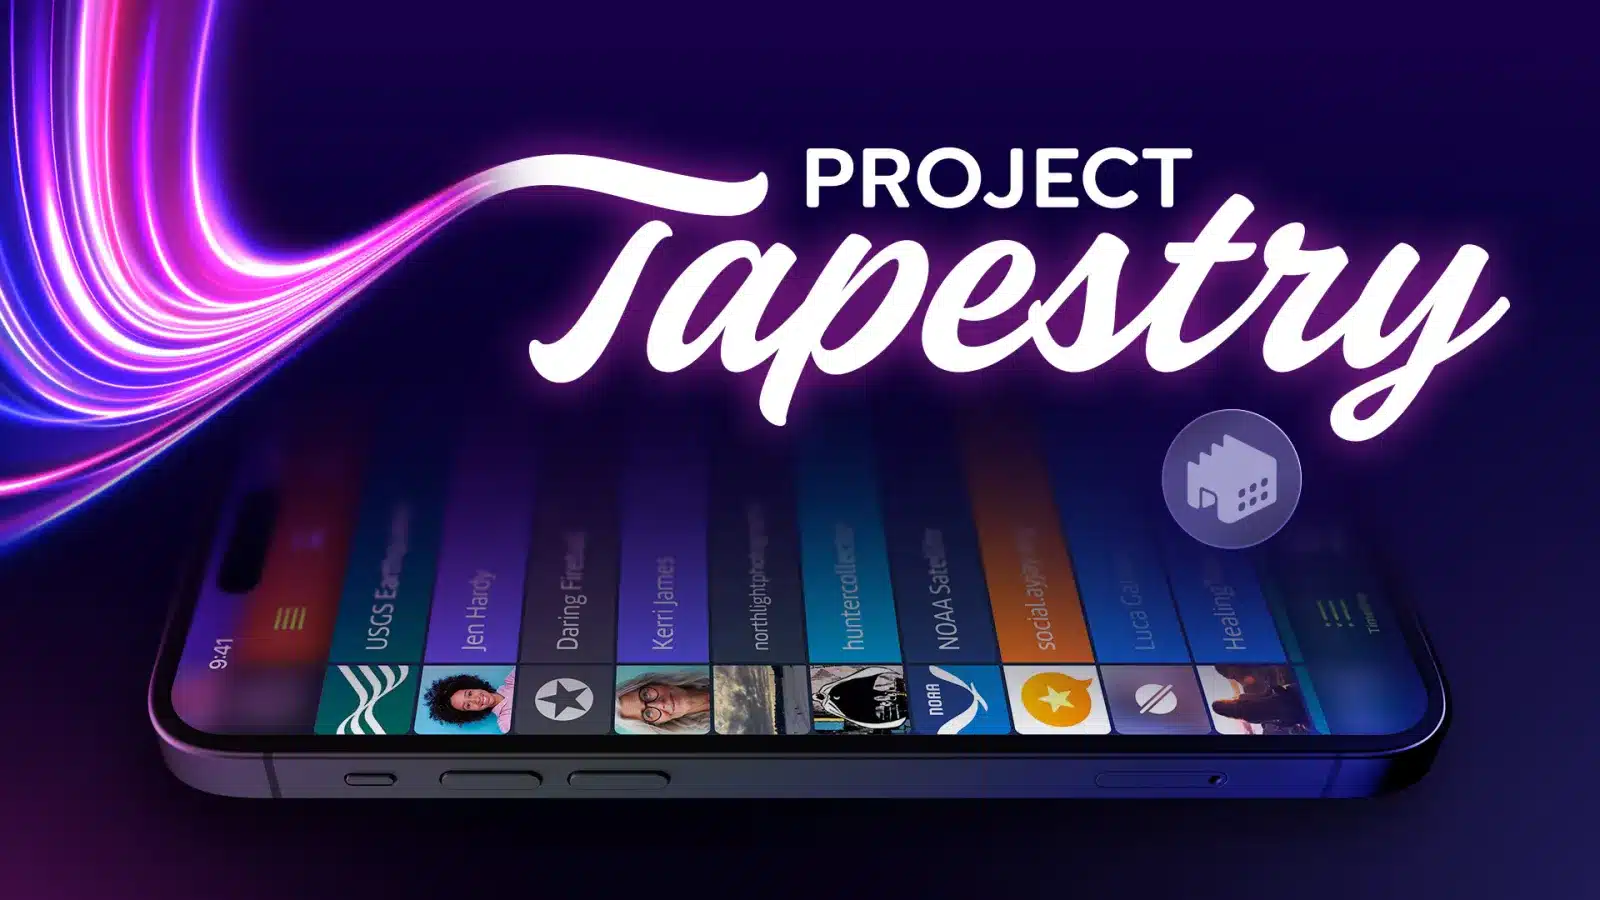 Twitterific Creators Return With "Project Tapestry," Aggregates Social Sites